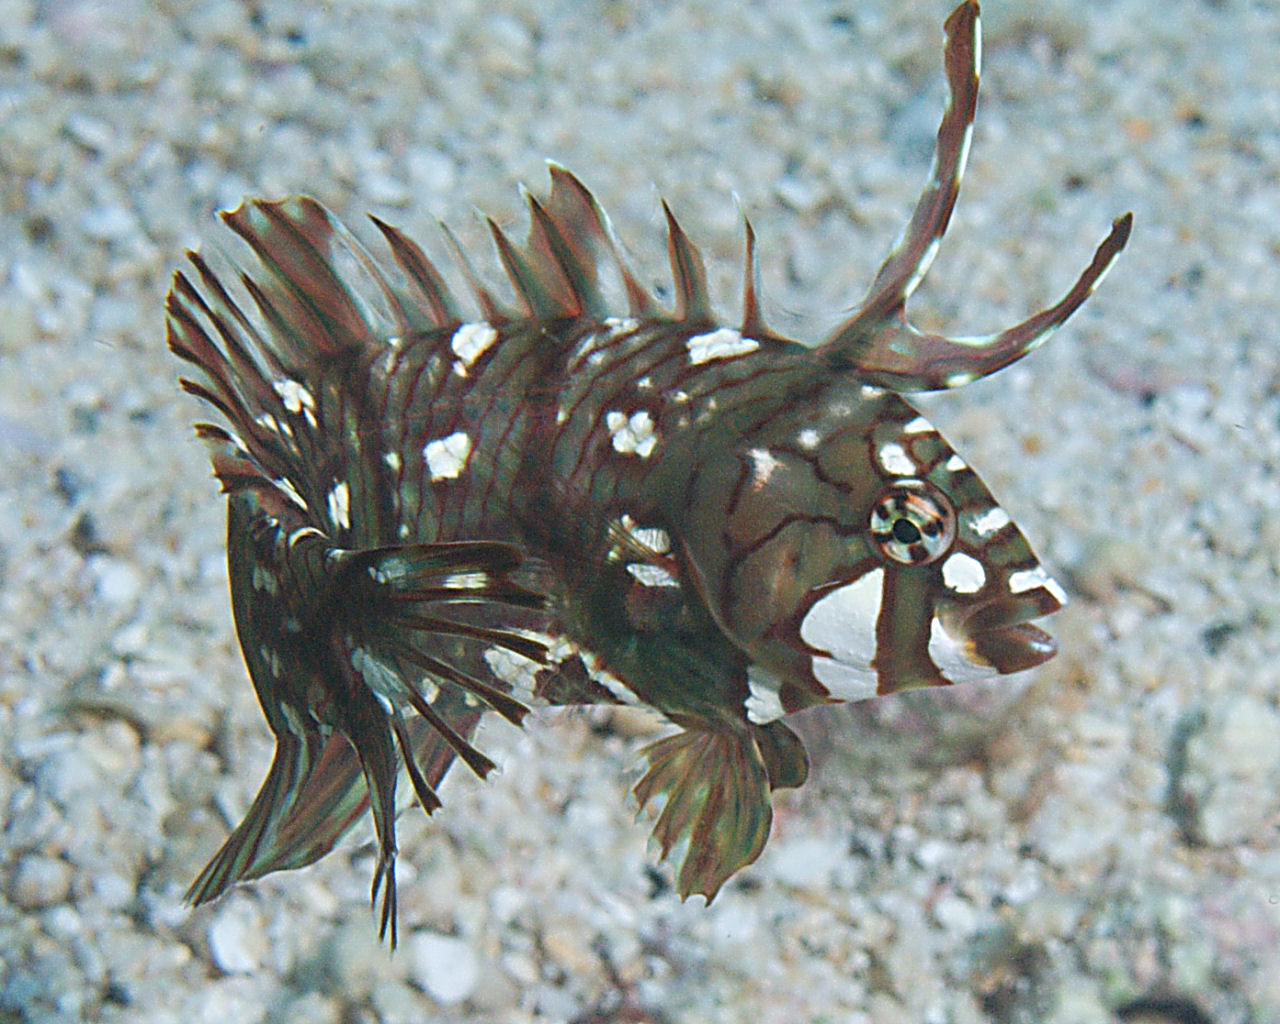 Rockmover wrasse at Barney's